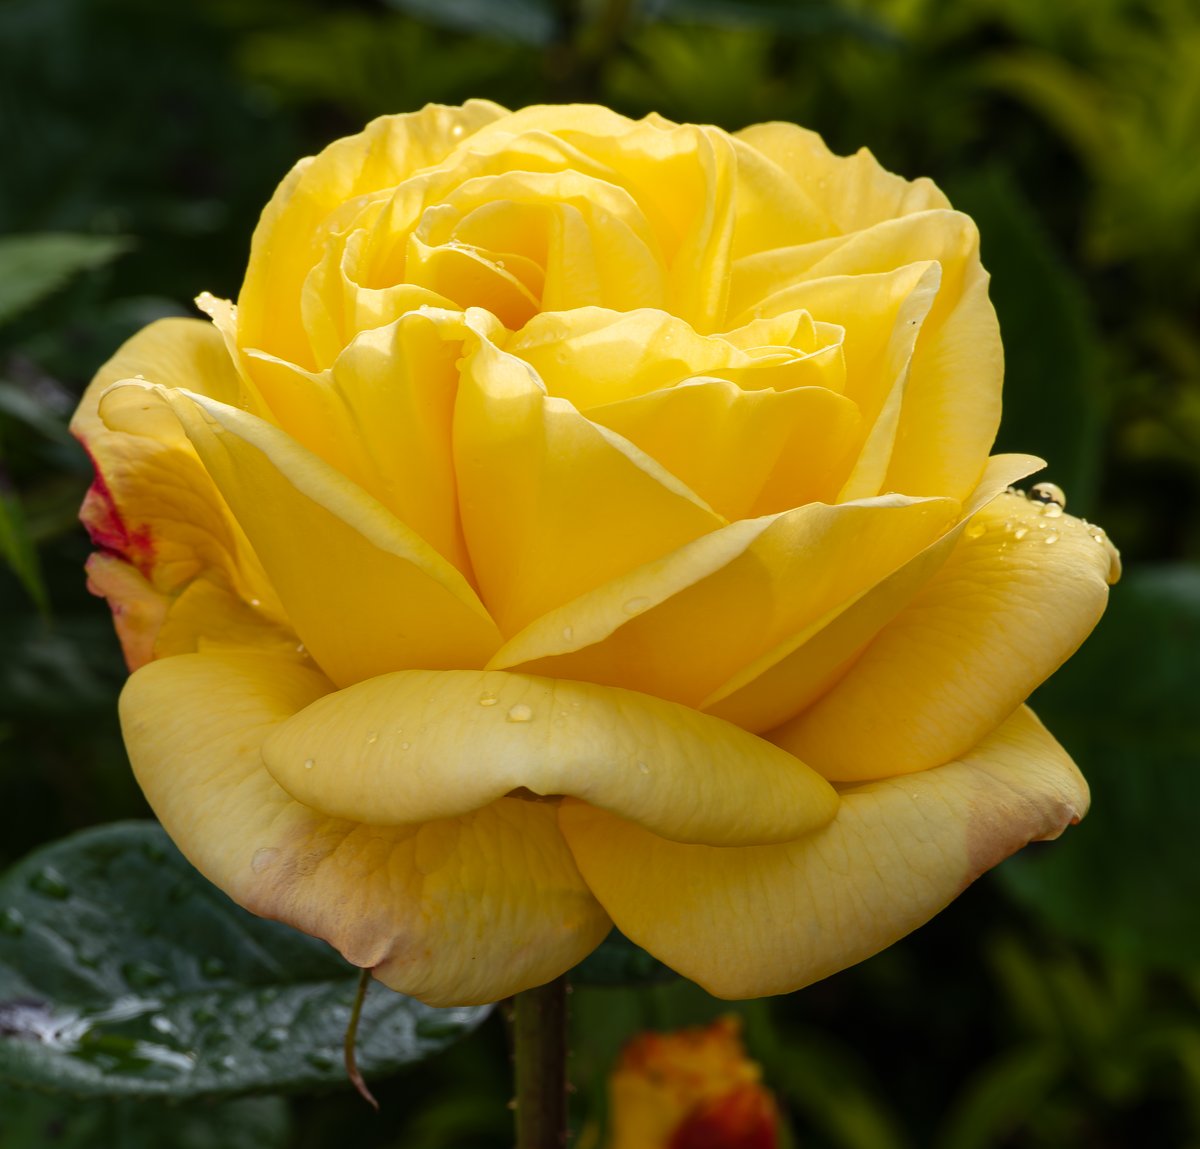 A yellow rose for #RoseWednesday #Roses #Flowers